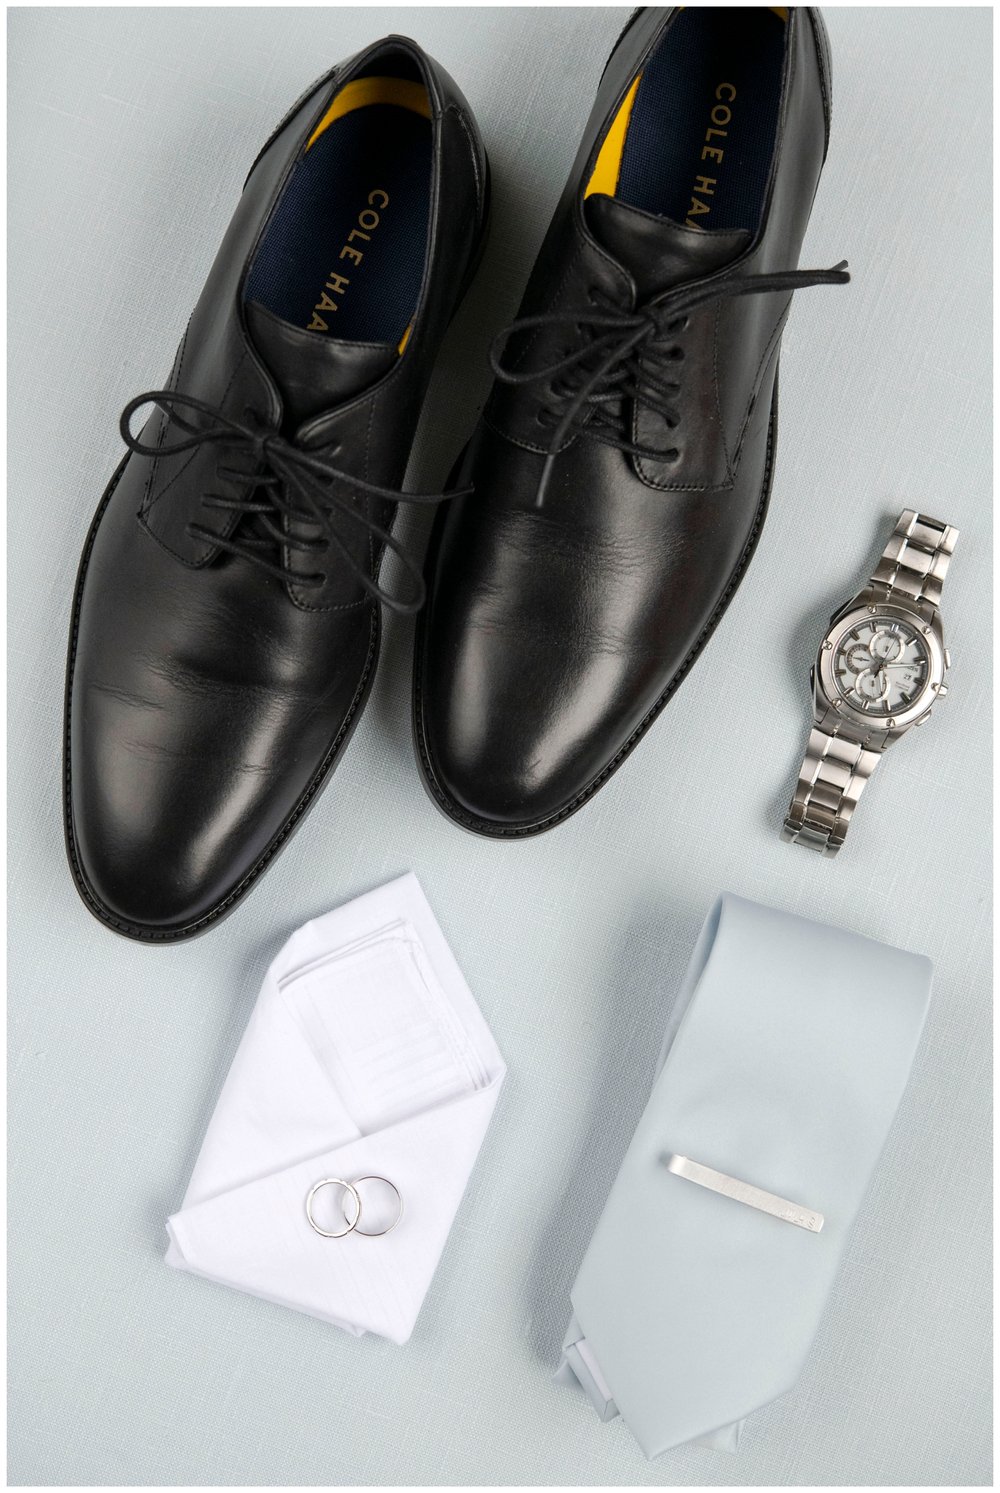 groom details flatlay with shoes and tie